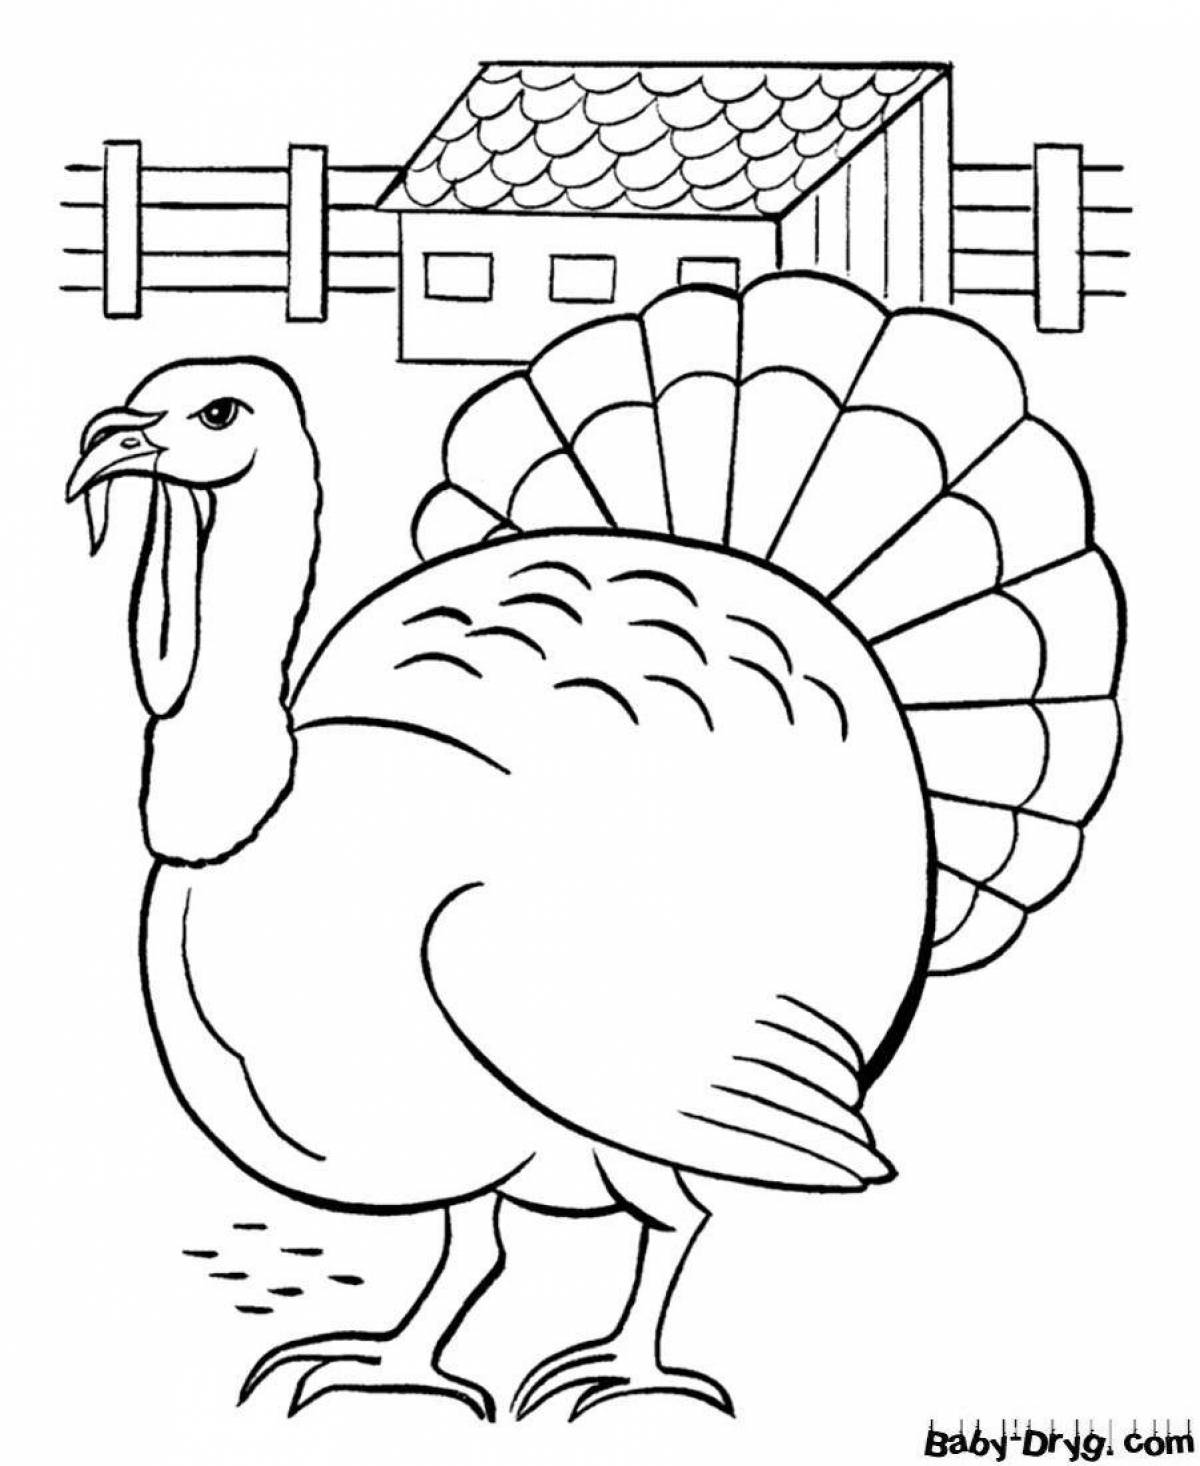 Merry turkey coloring book for kids